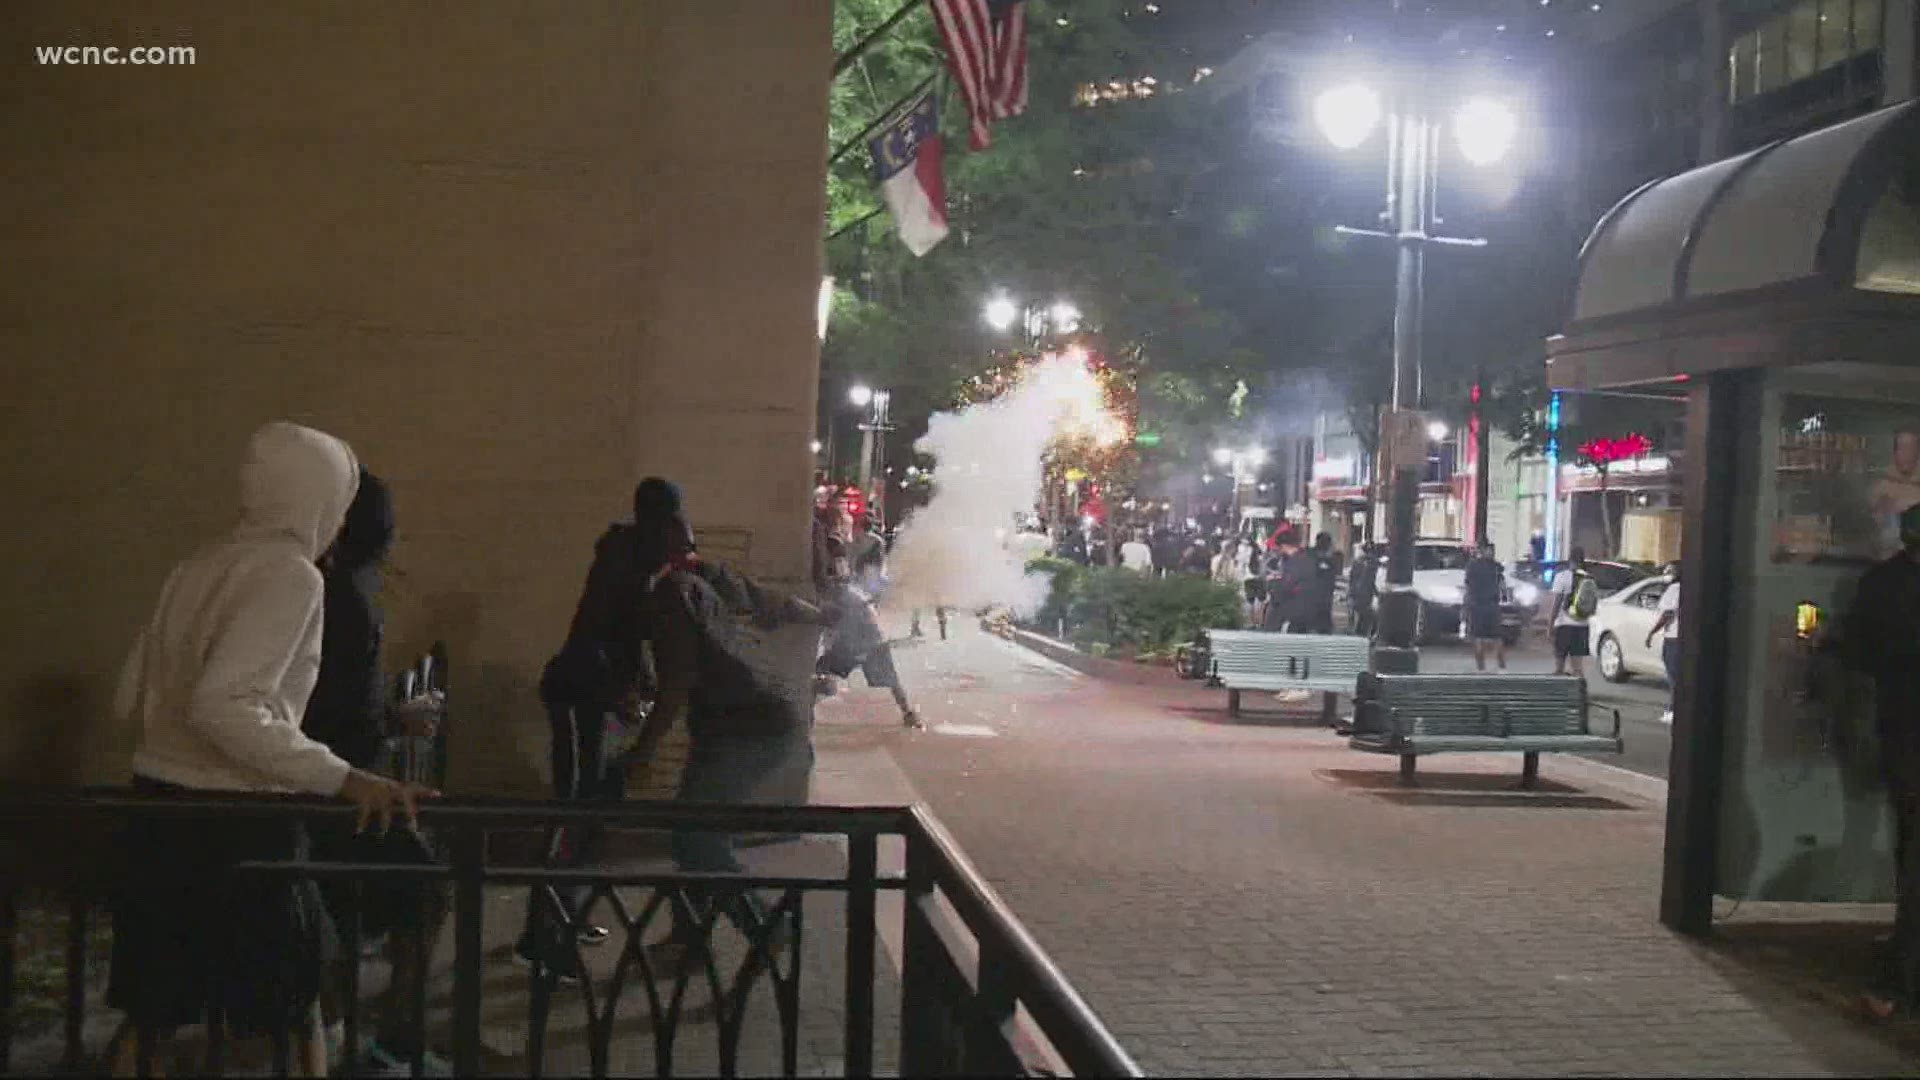 Explosions and tear gas, protesters ran through uptown after protest Tuesday night.